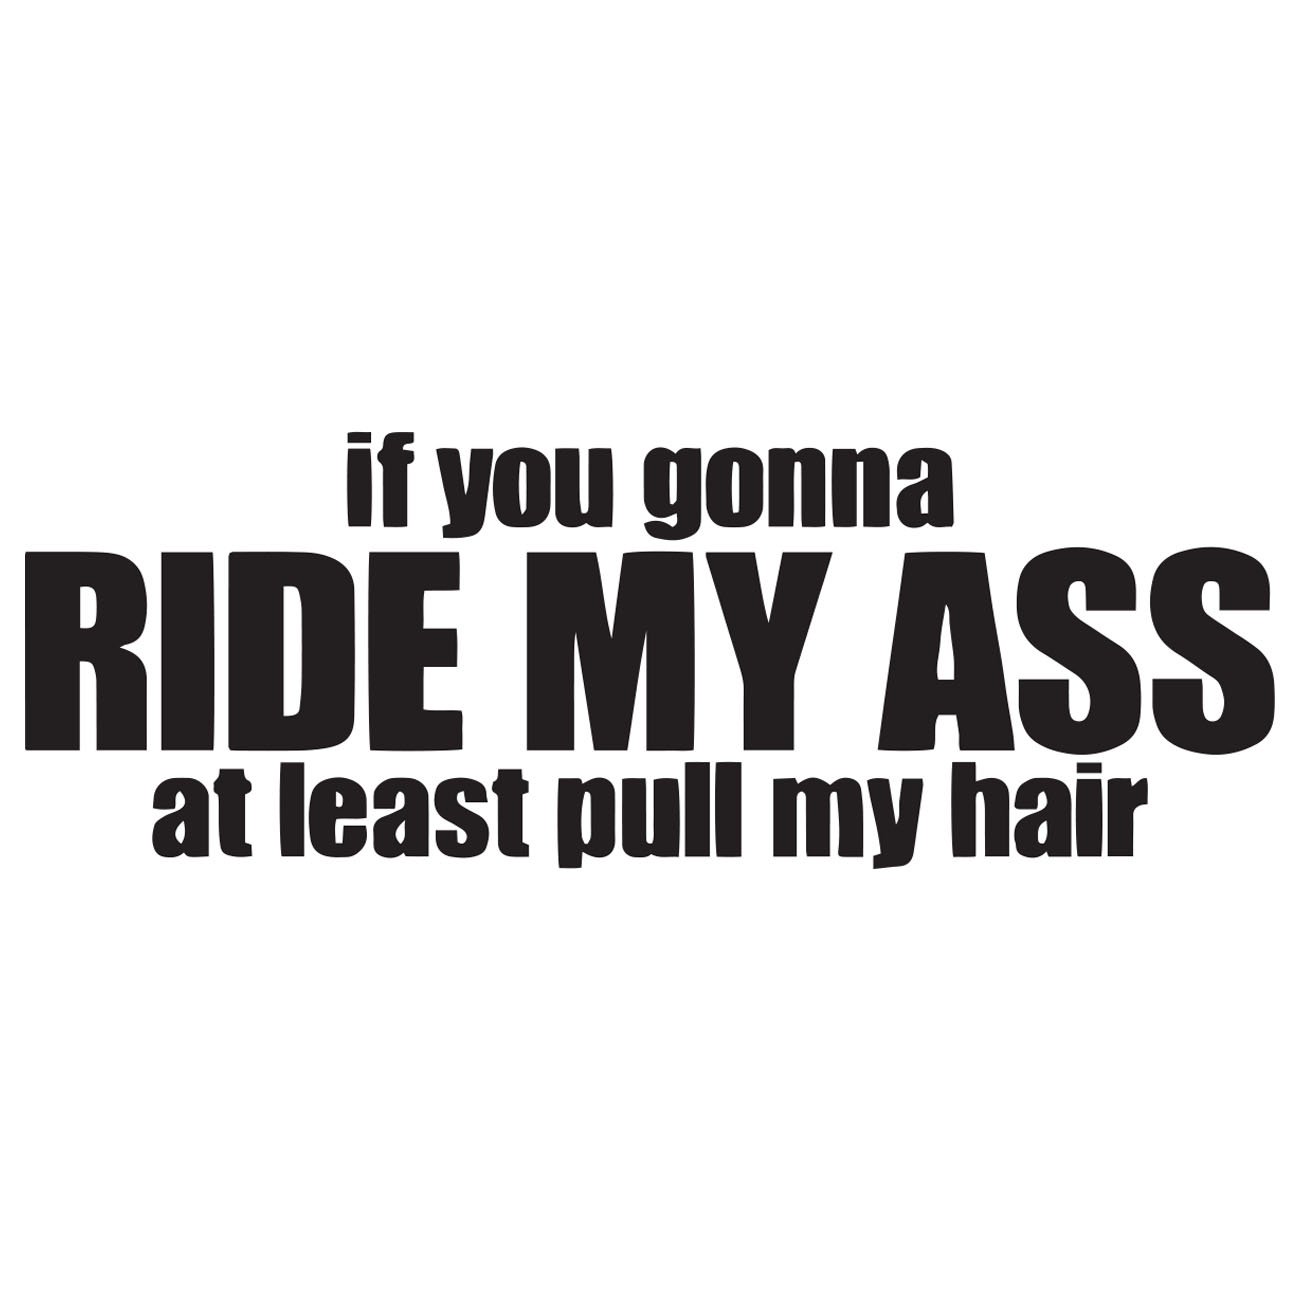 If you gonna ride my ass - At least pull my hair